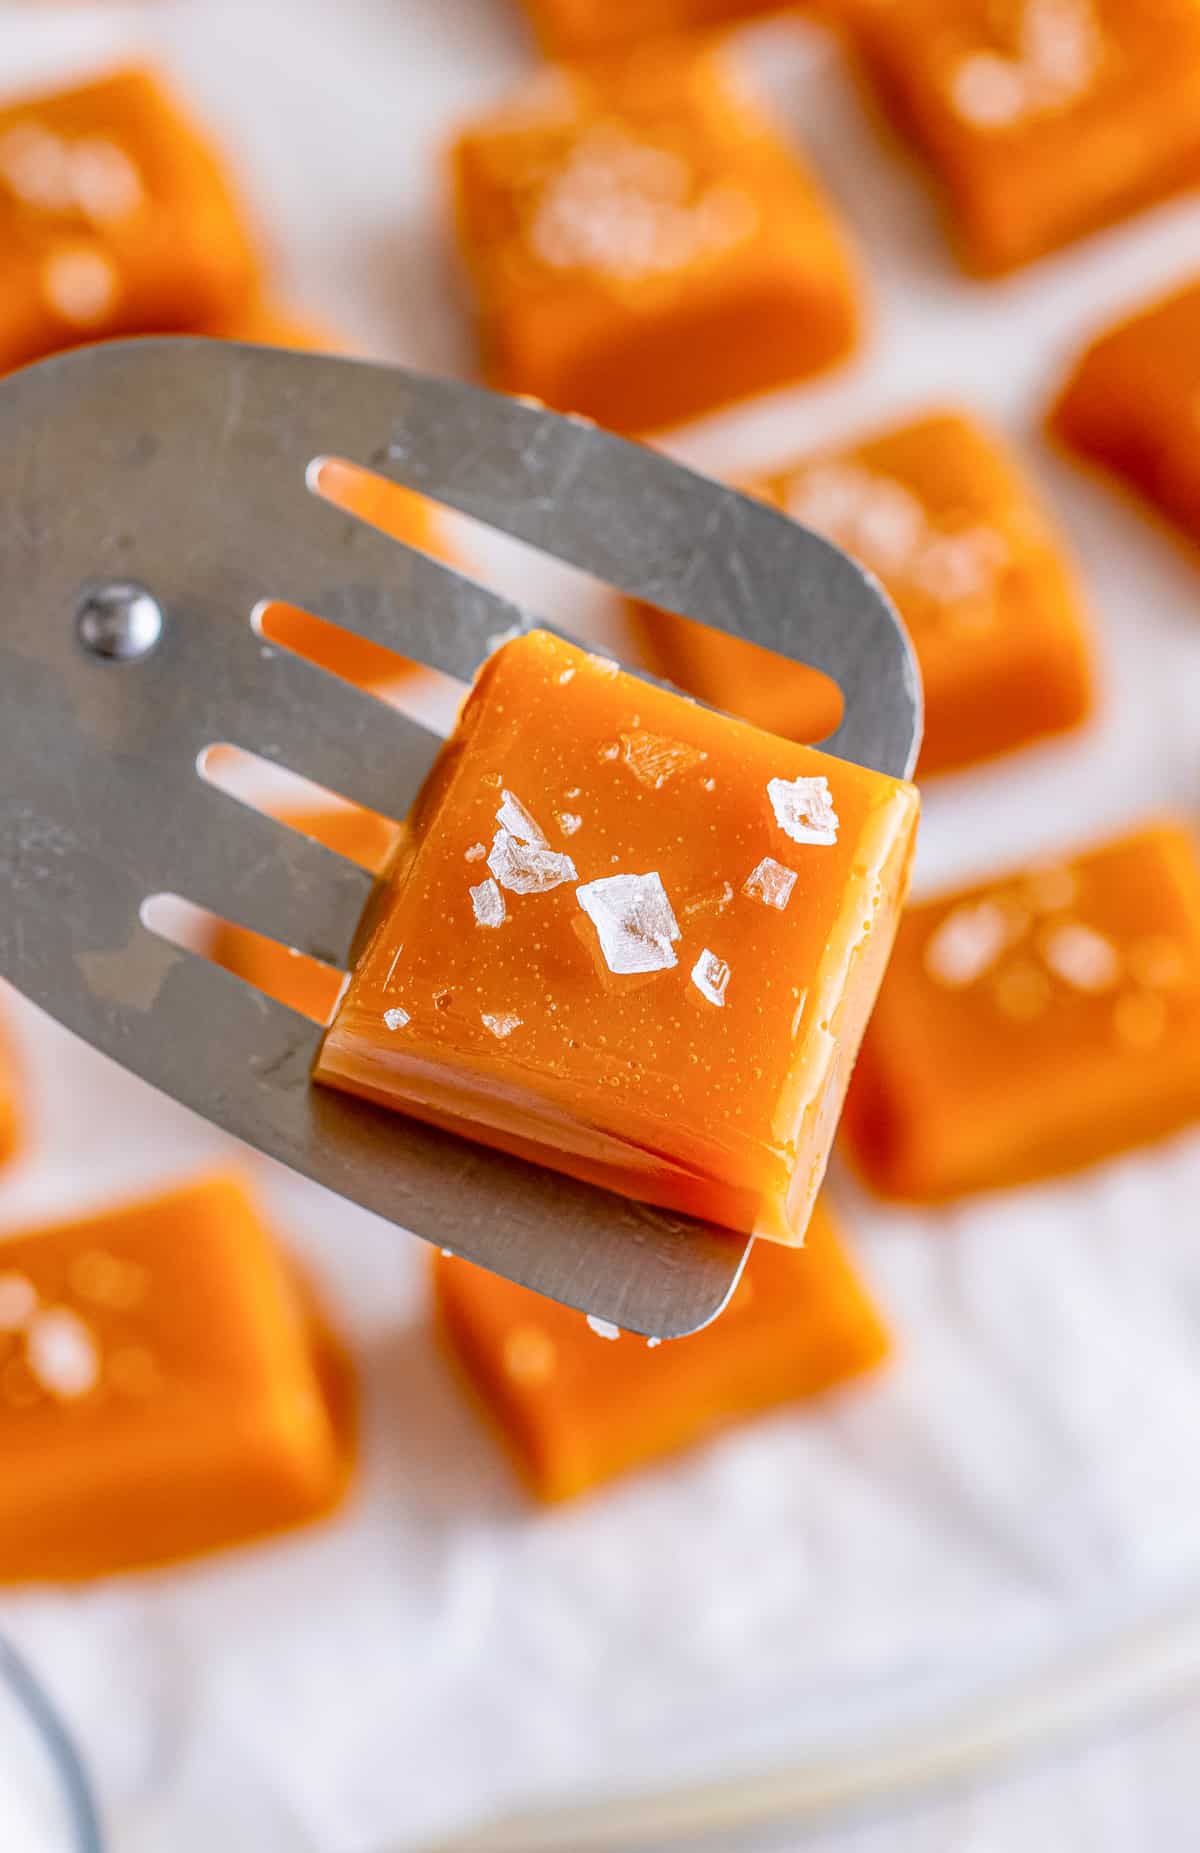 Spatula holding up one of the caramels showing salt.